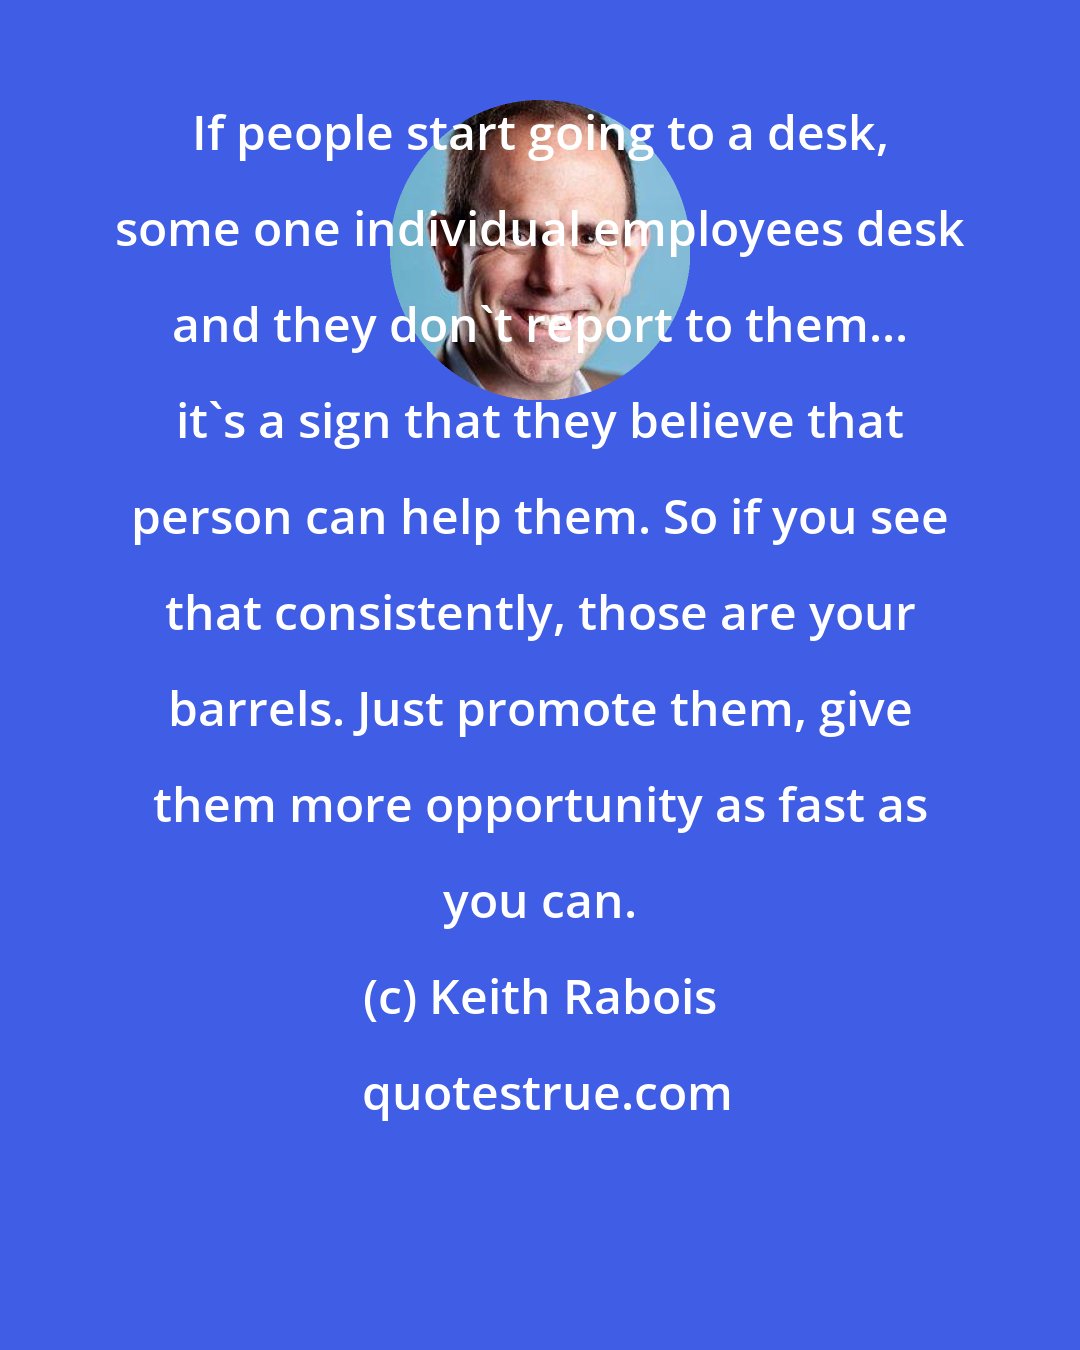 Keith Rabois: If people start going to a desk, some one individual employees desk and they don't report to them... it's a sign that they believe that person can help them. So if you see that consistently, those are your barrels. Just promote them, give them more opportunity as fast as you can.